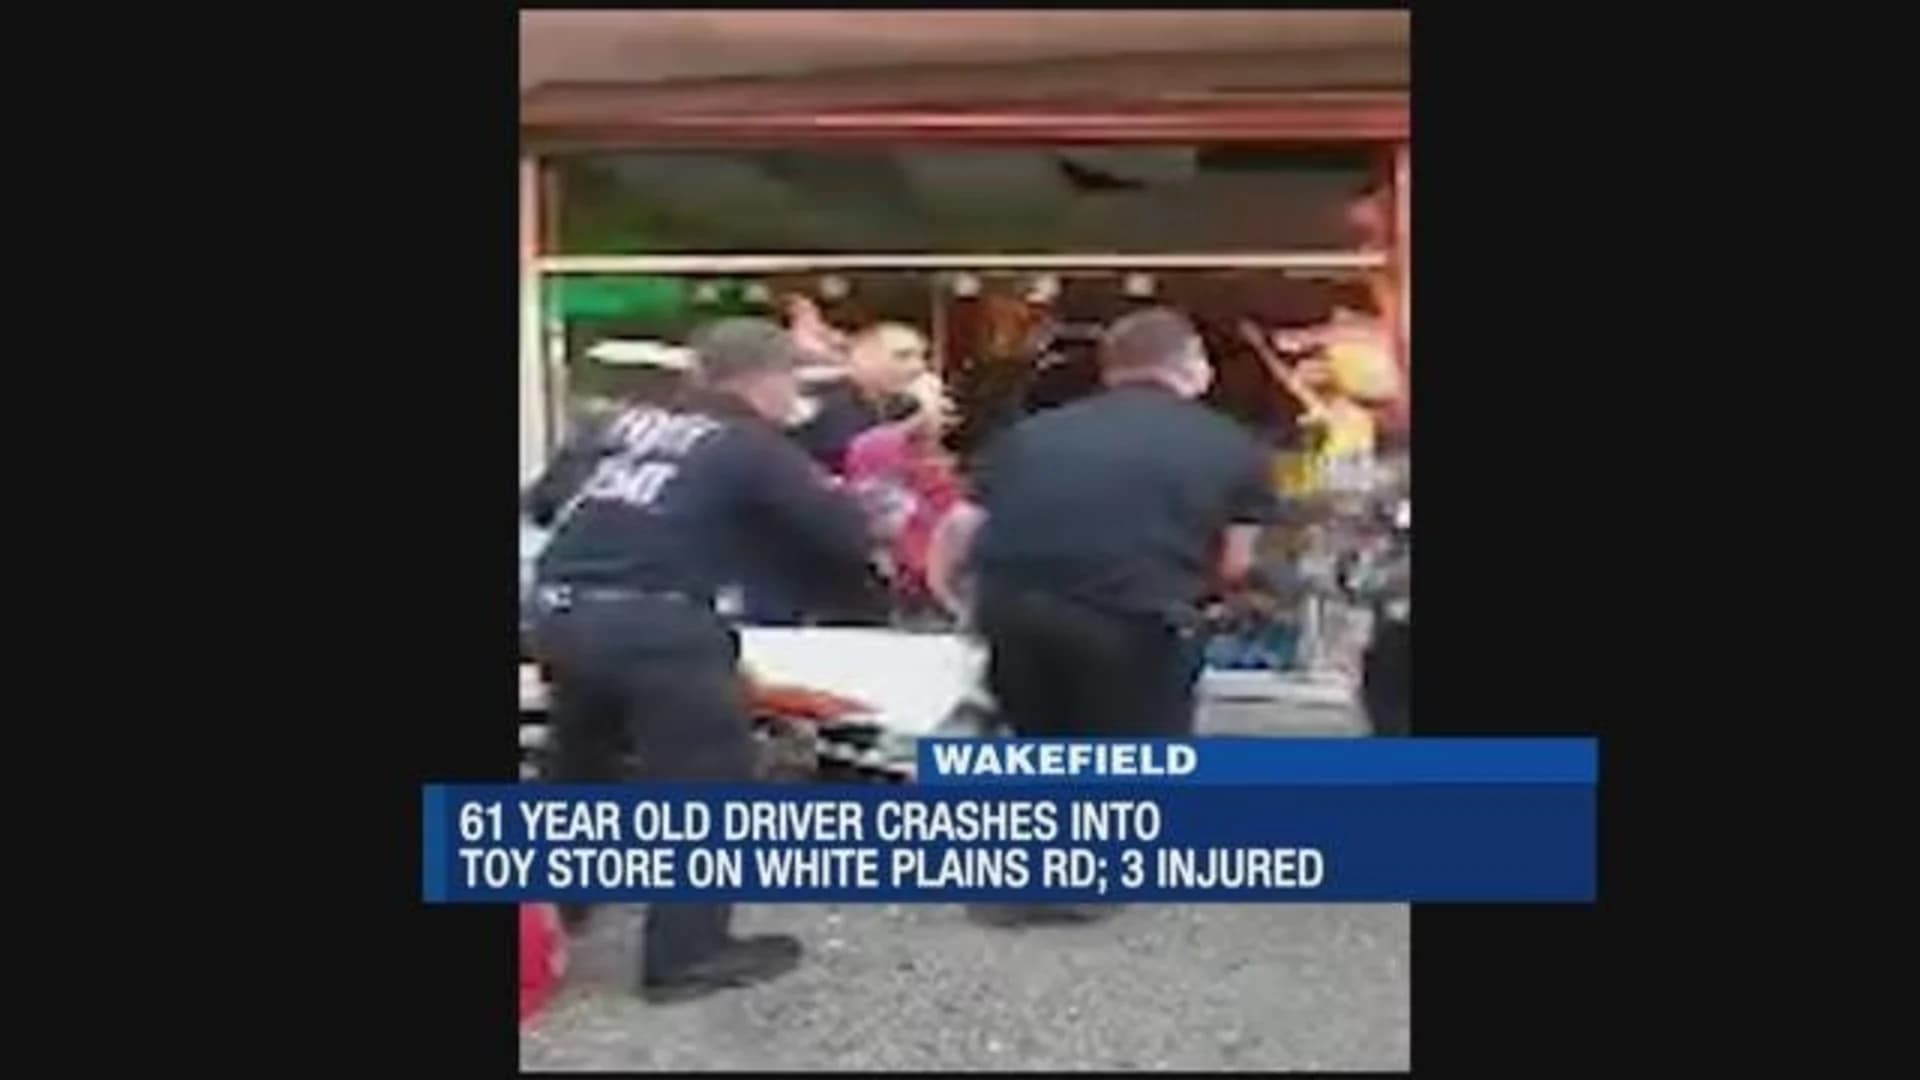 At least 3 injured after driver crashes into toy store